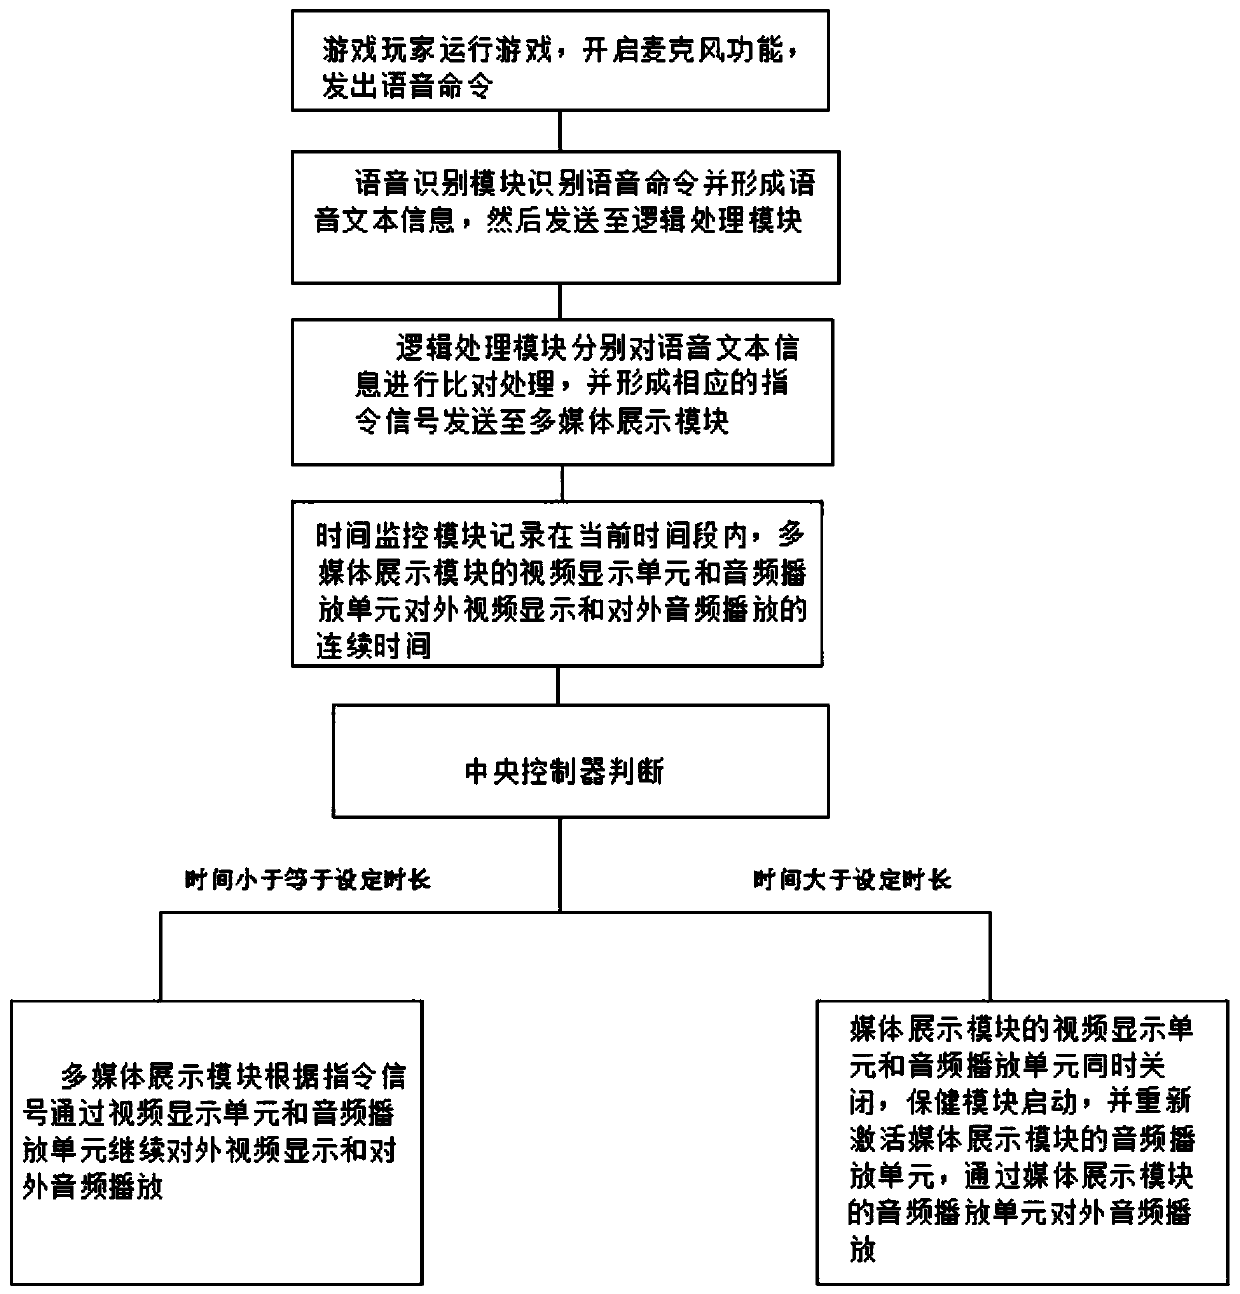 Mobile game control system and method based on voice recognition technology